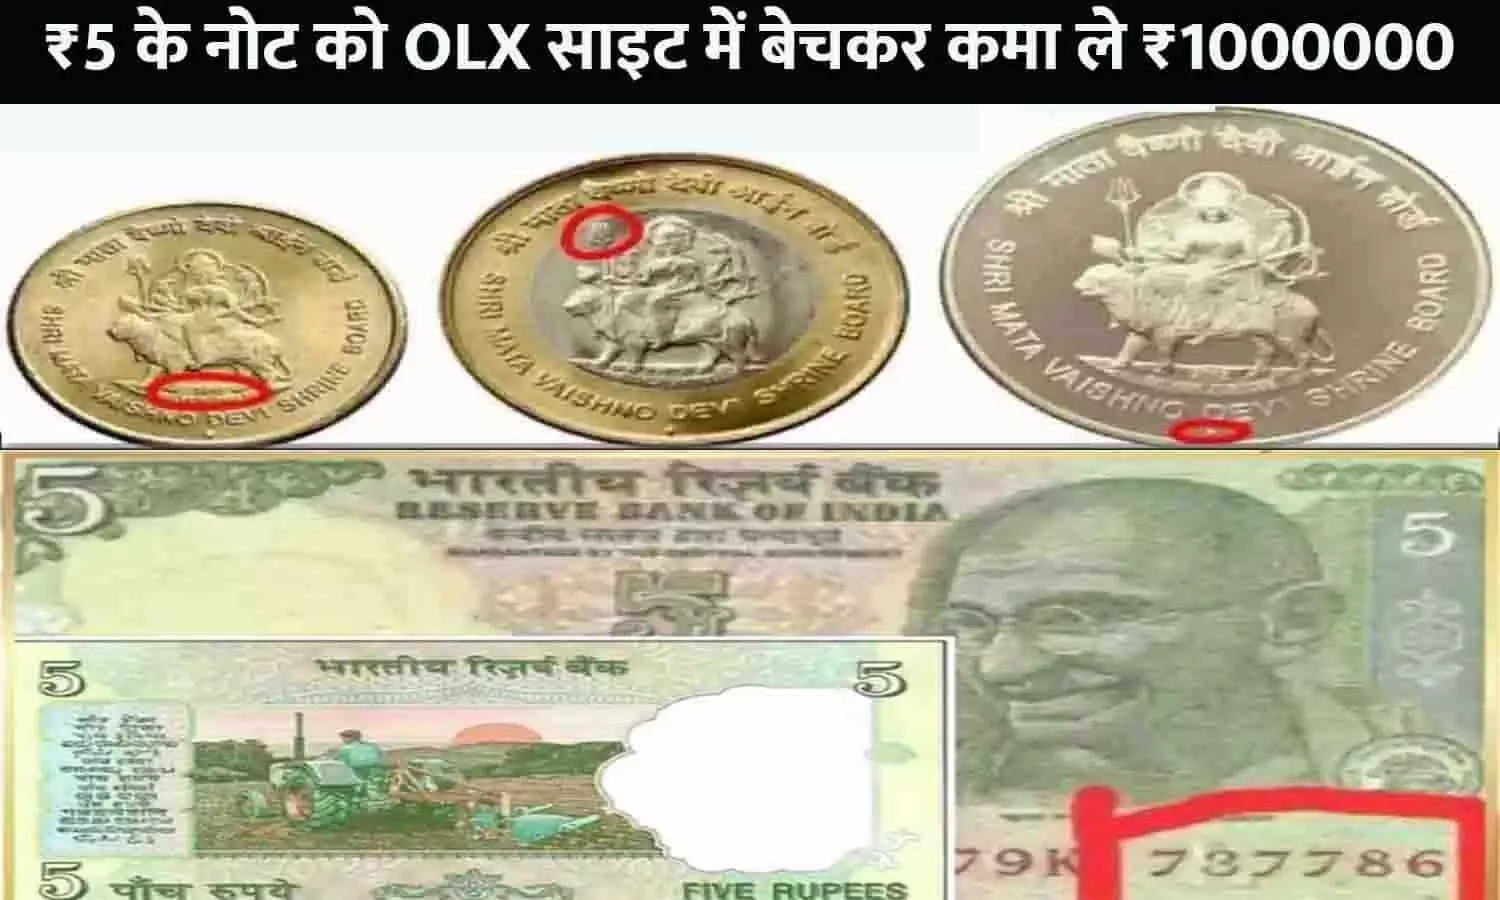 Old 5 Rupee Note OLX